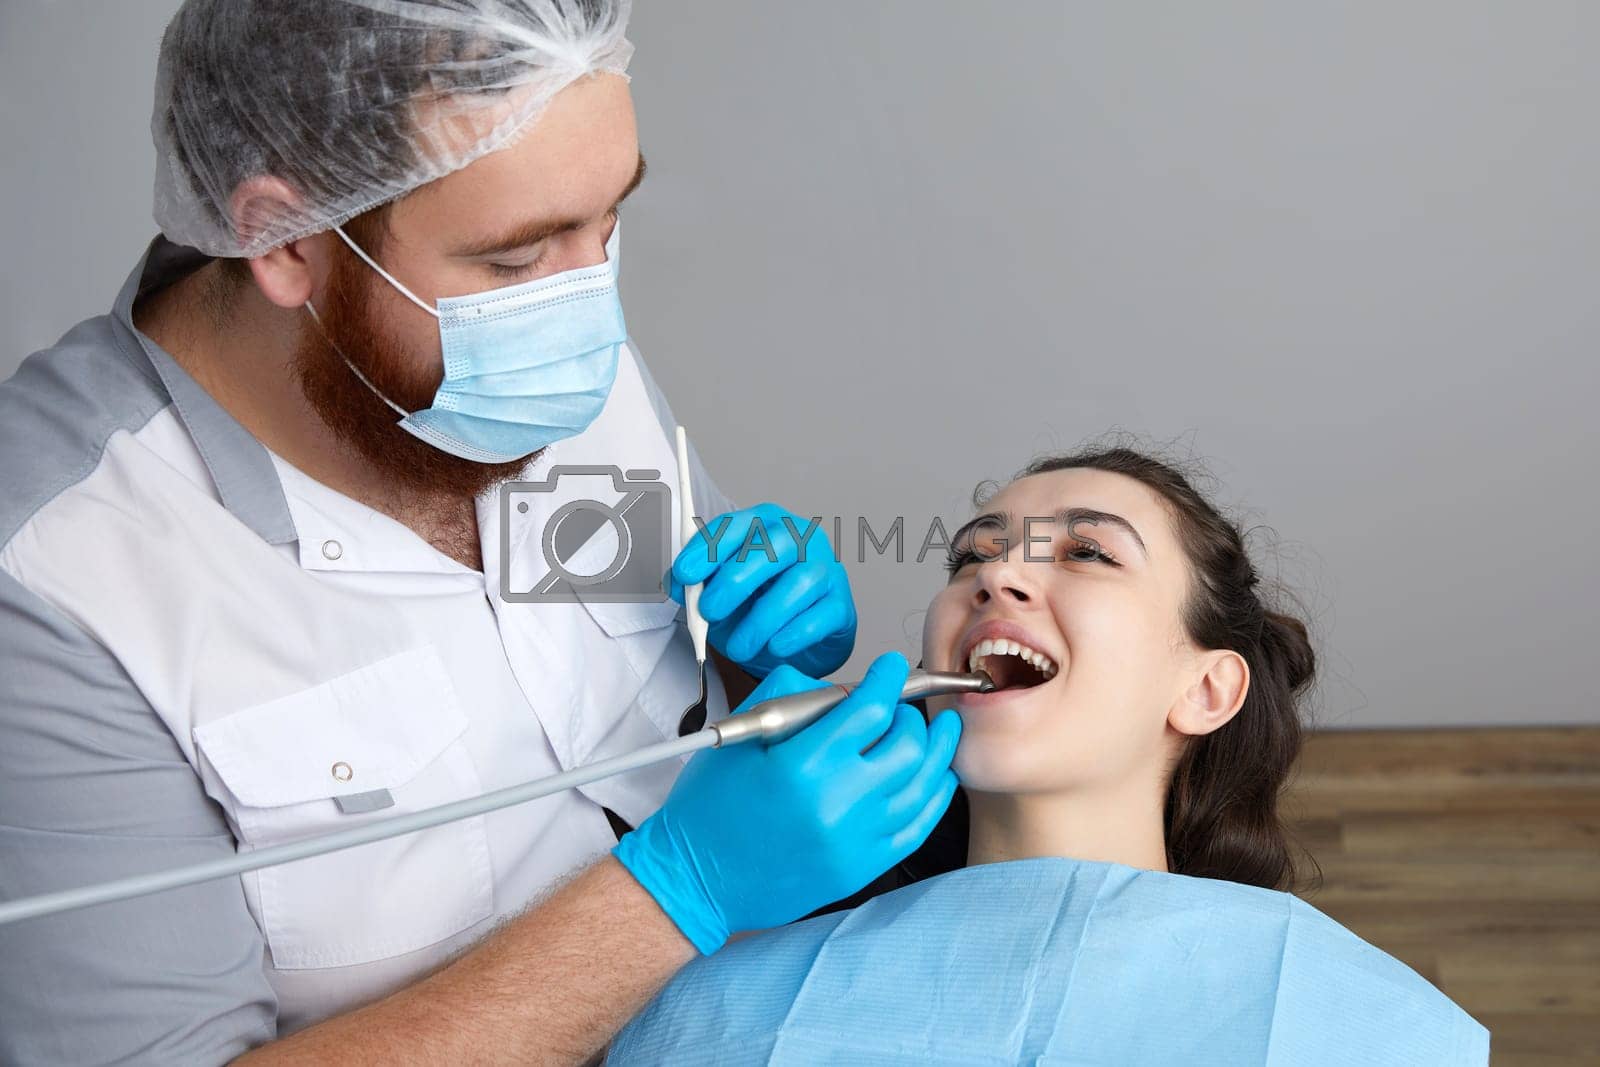 Royalty free image of Dentist drilling tooth of female patient in dental chair by Mariakray